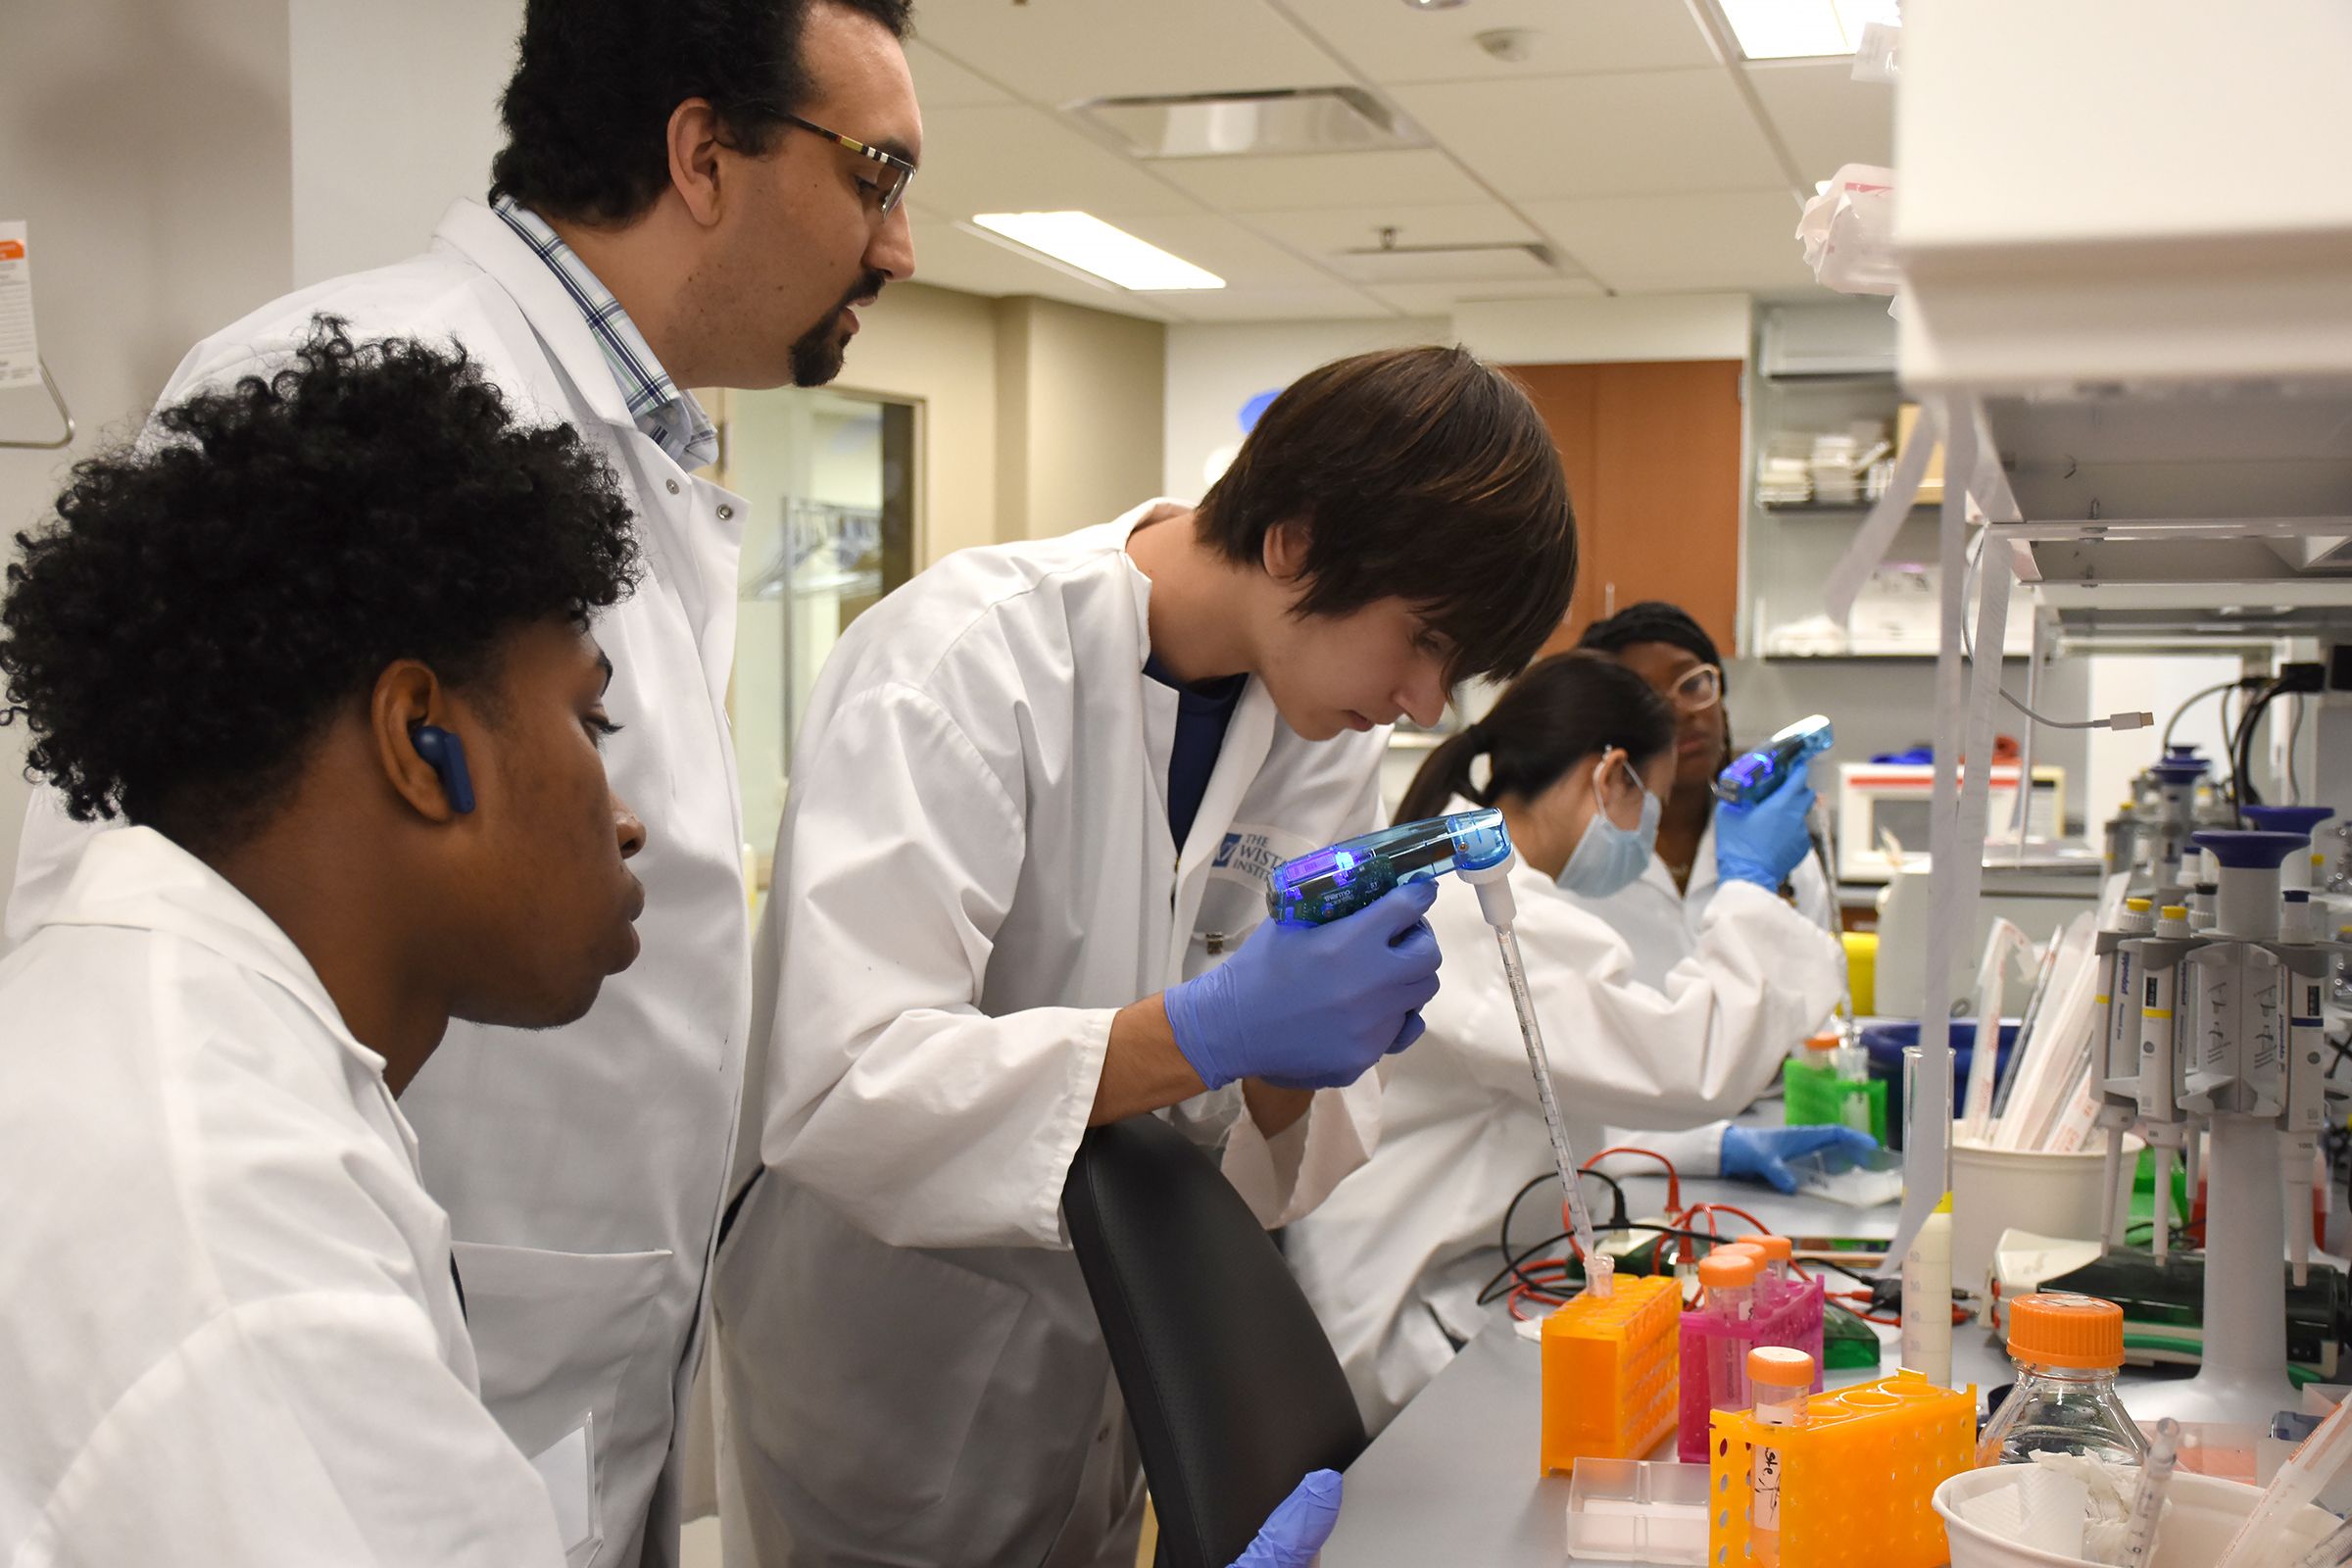 biomedical research topics for high school students